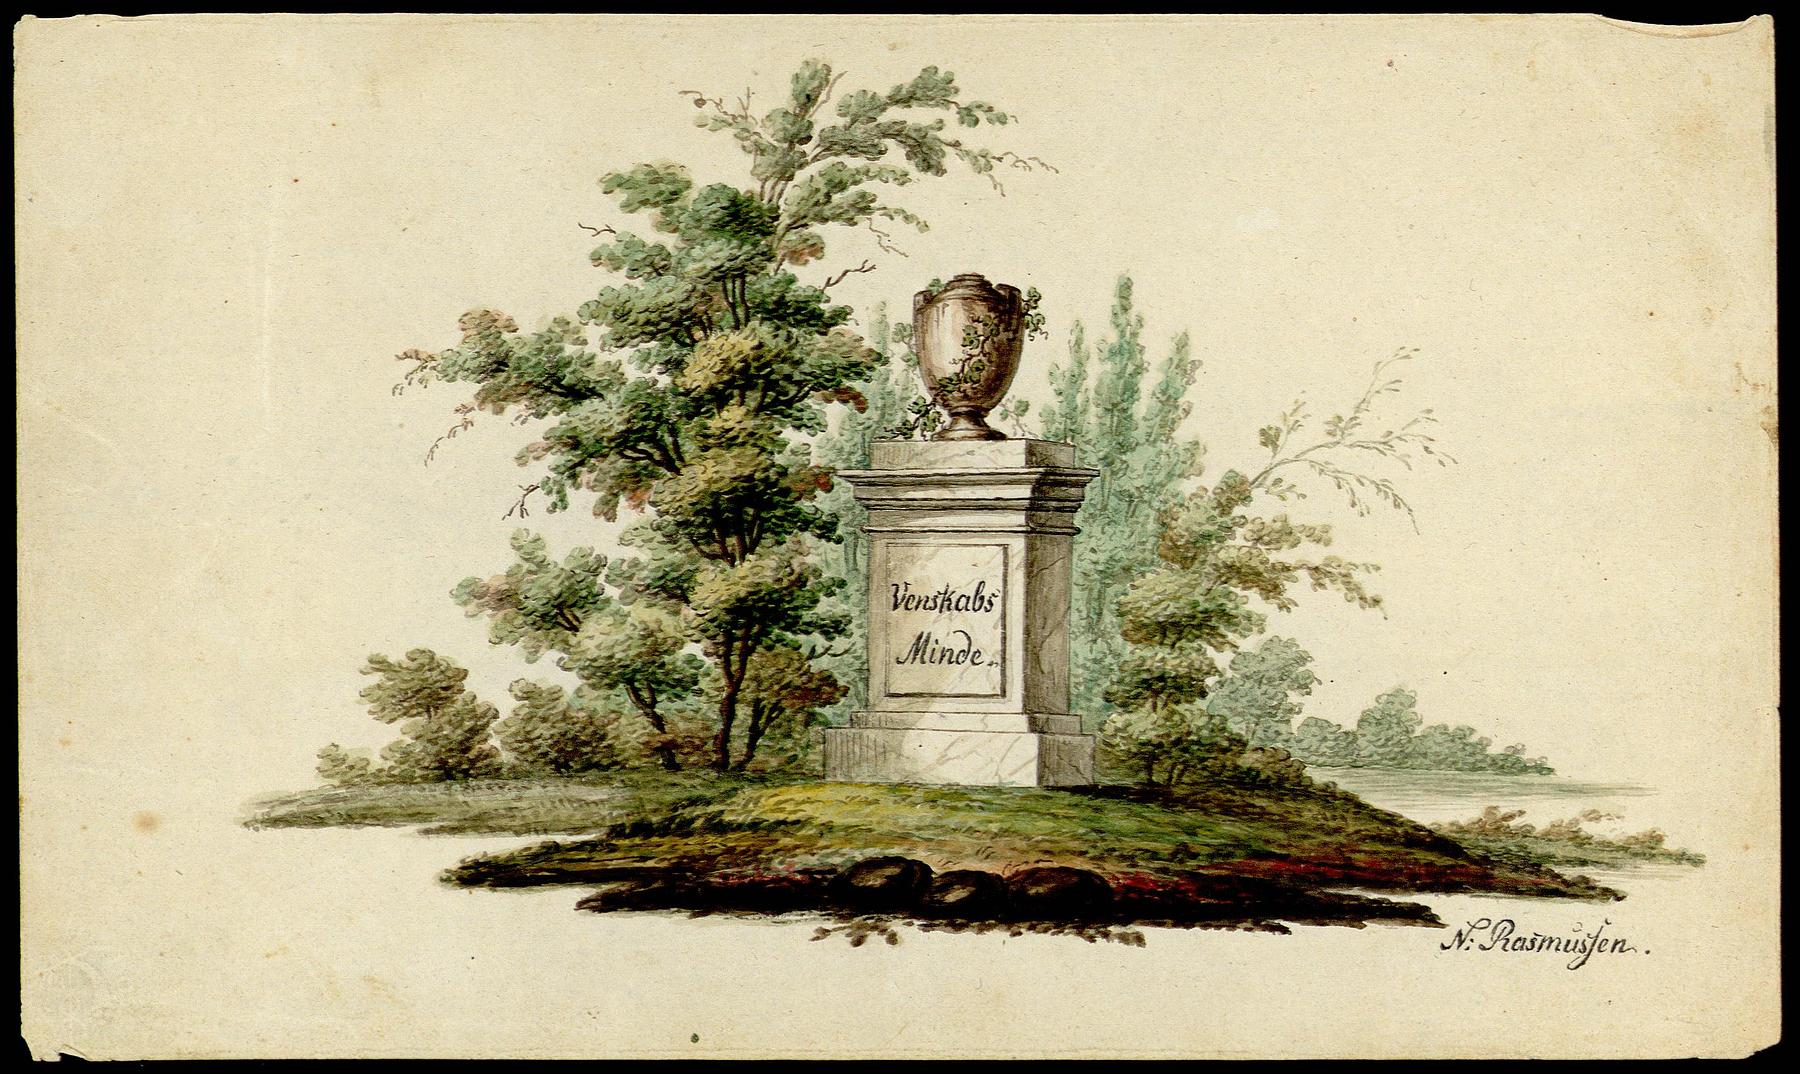 Garden view with an urn on a plinth titled "Friendship Memorial", N261,27